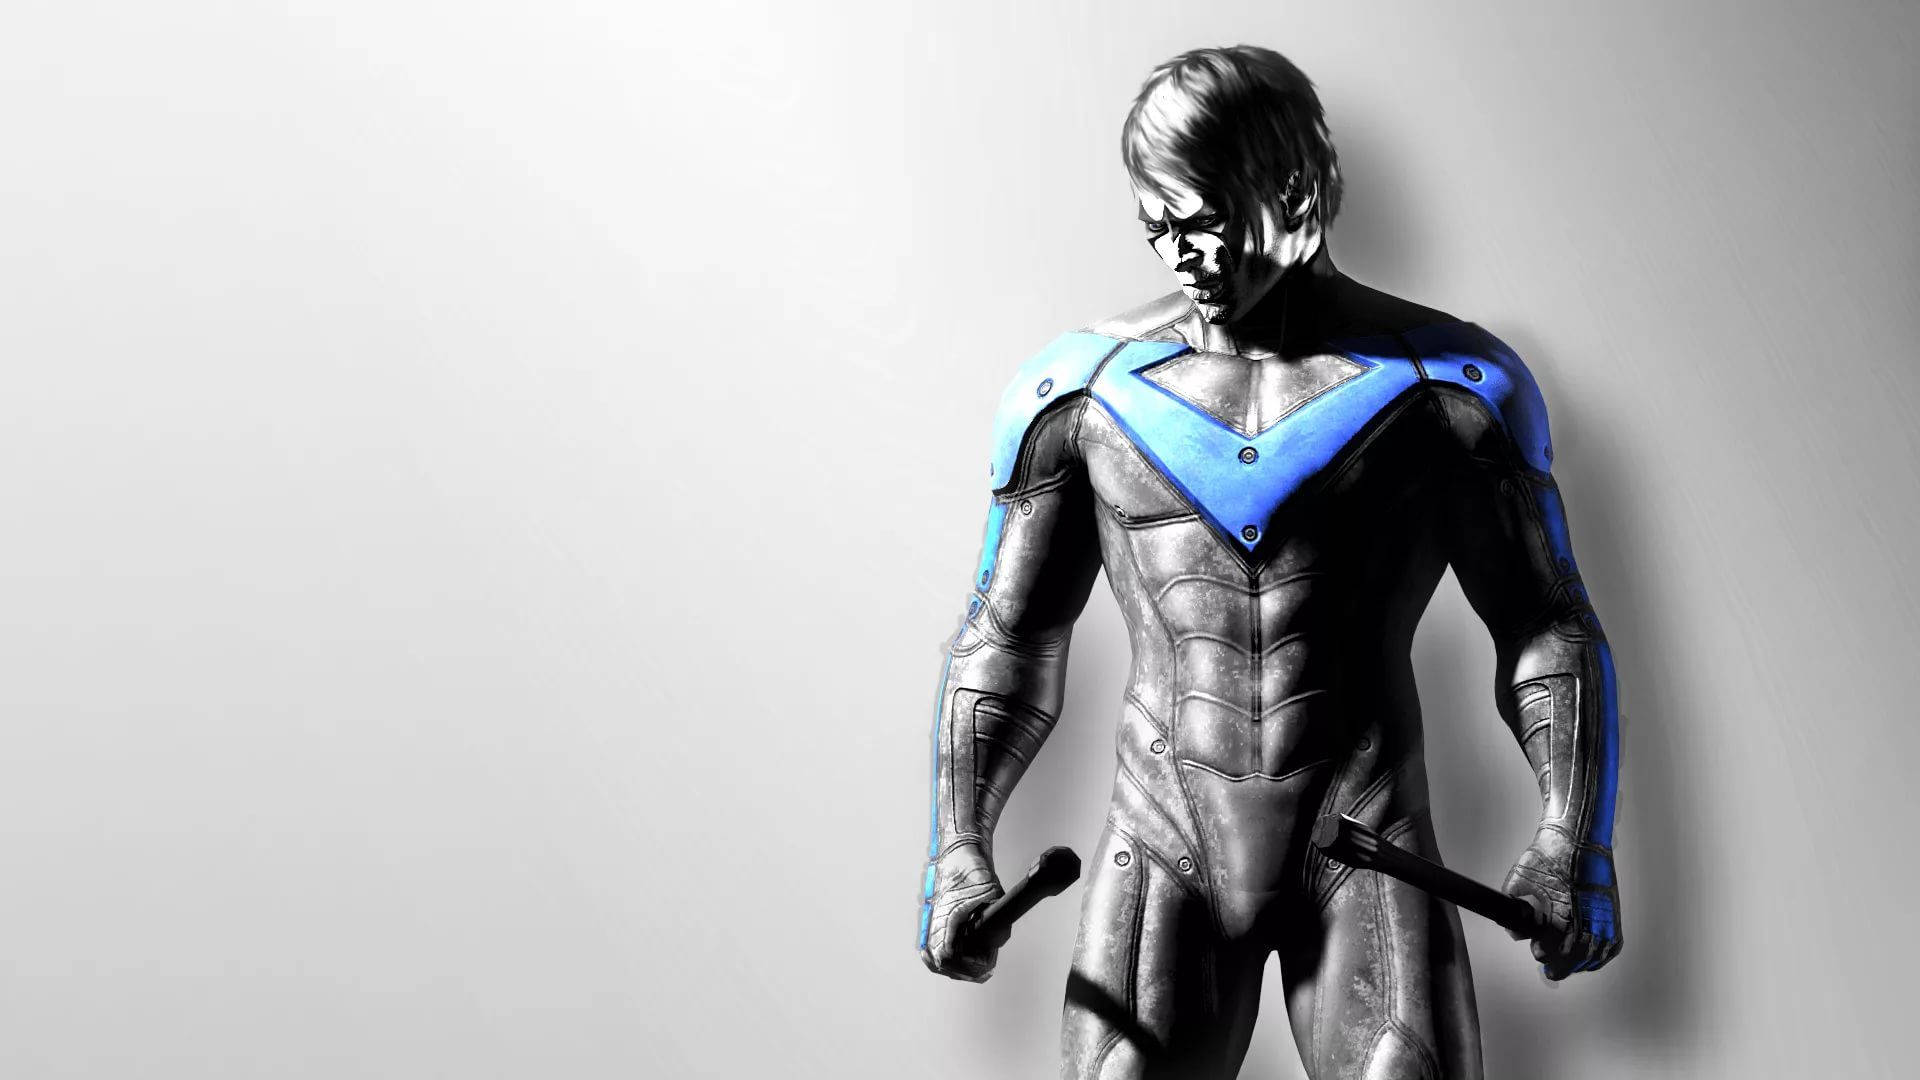 Nightwing Charcoal Sketch Wallpaper